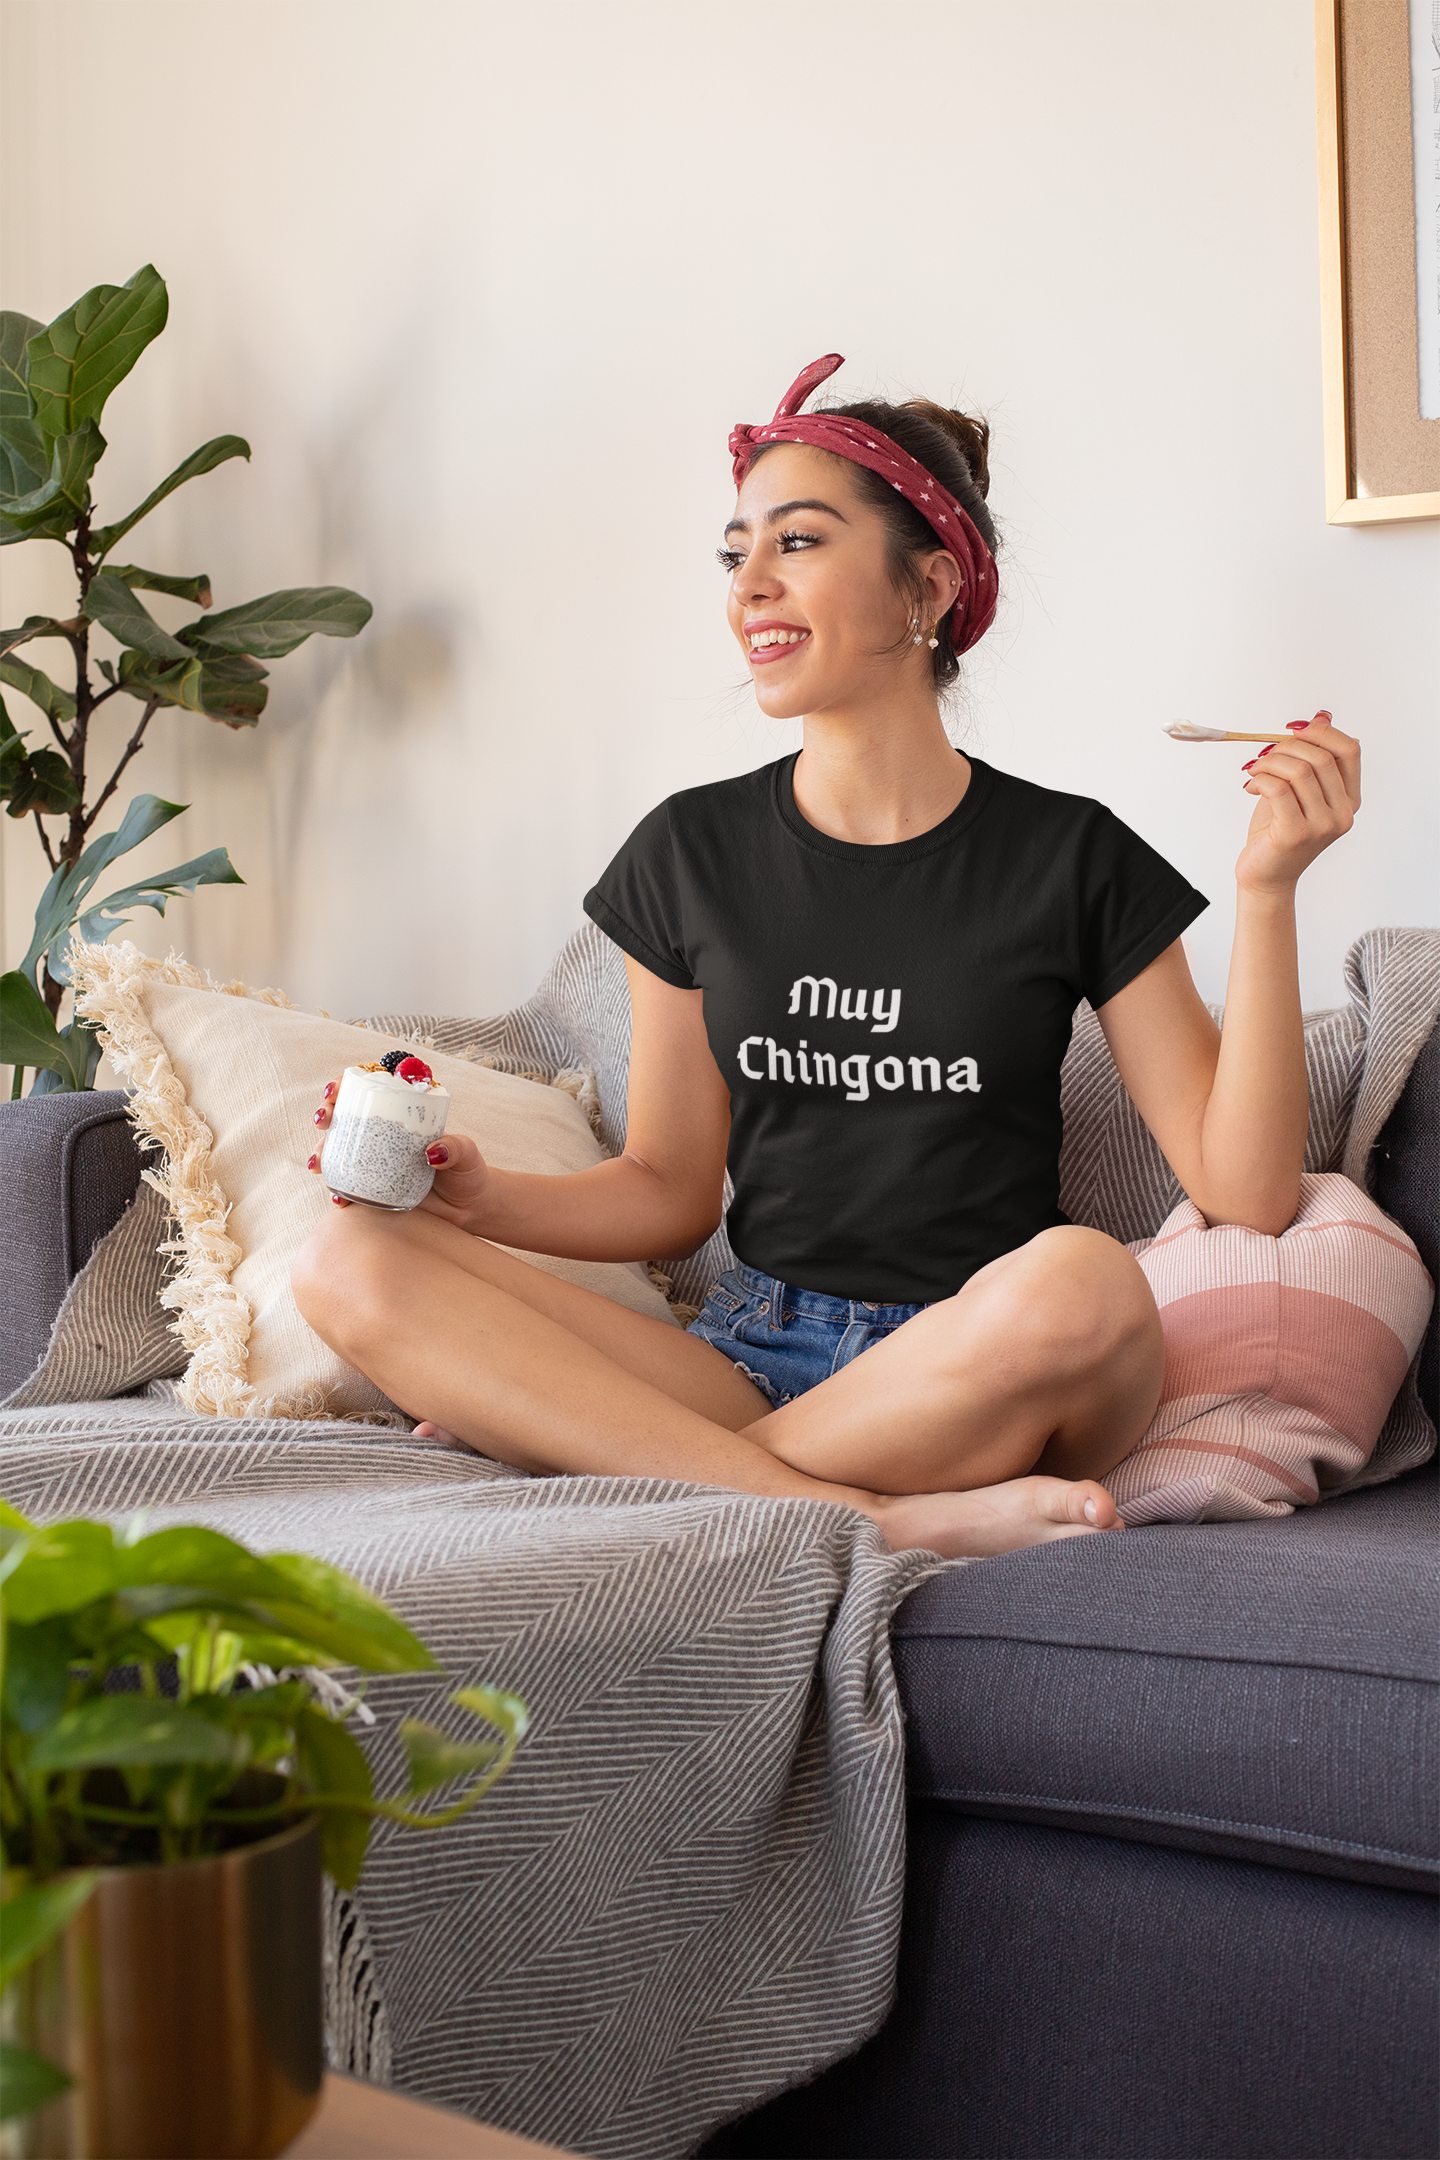 Women's Muy Chingona - Obnoxious Apparel - Funny Offensive Shirts